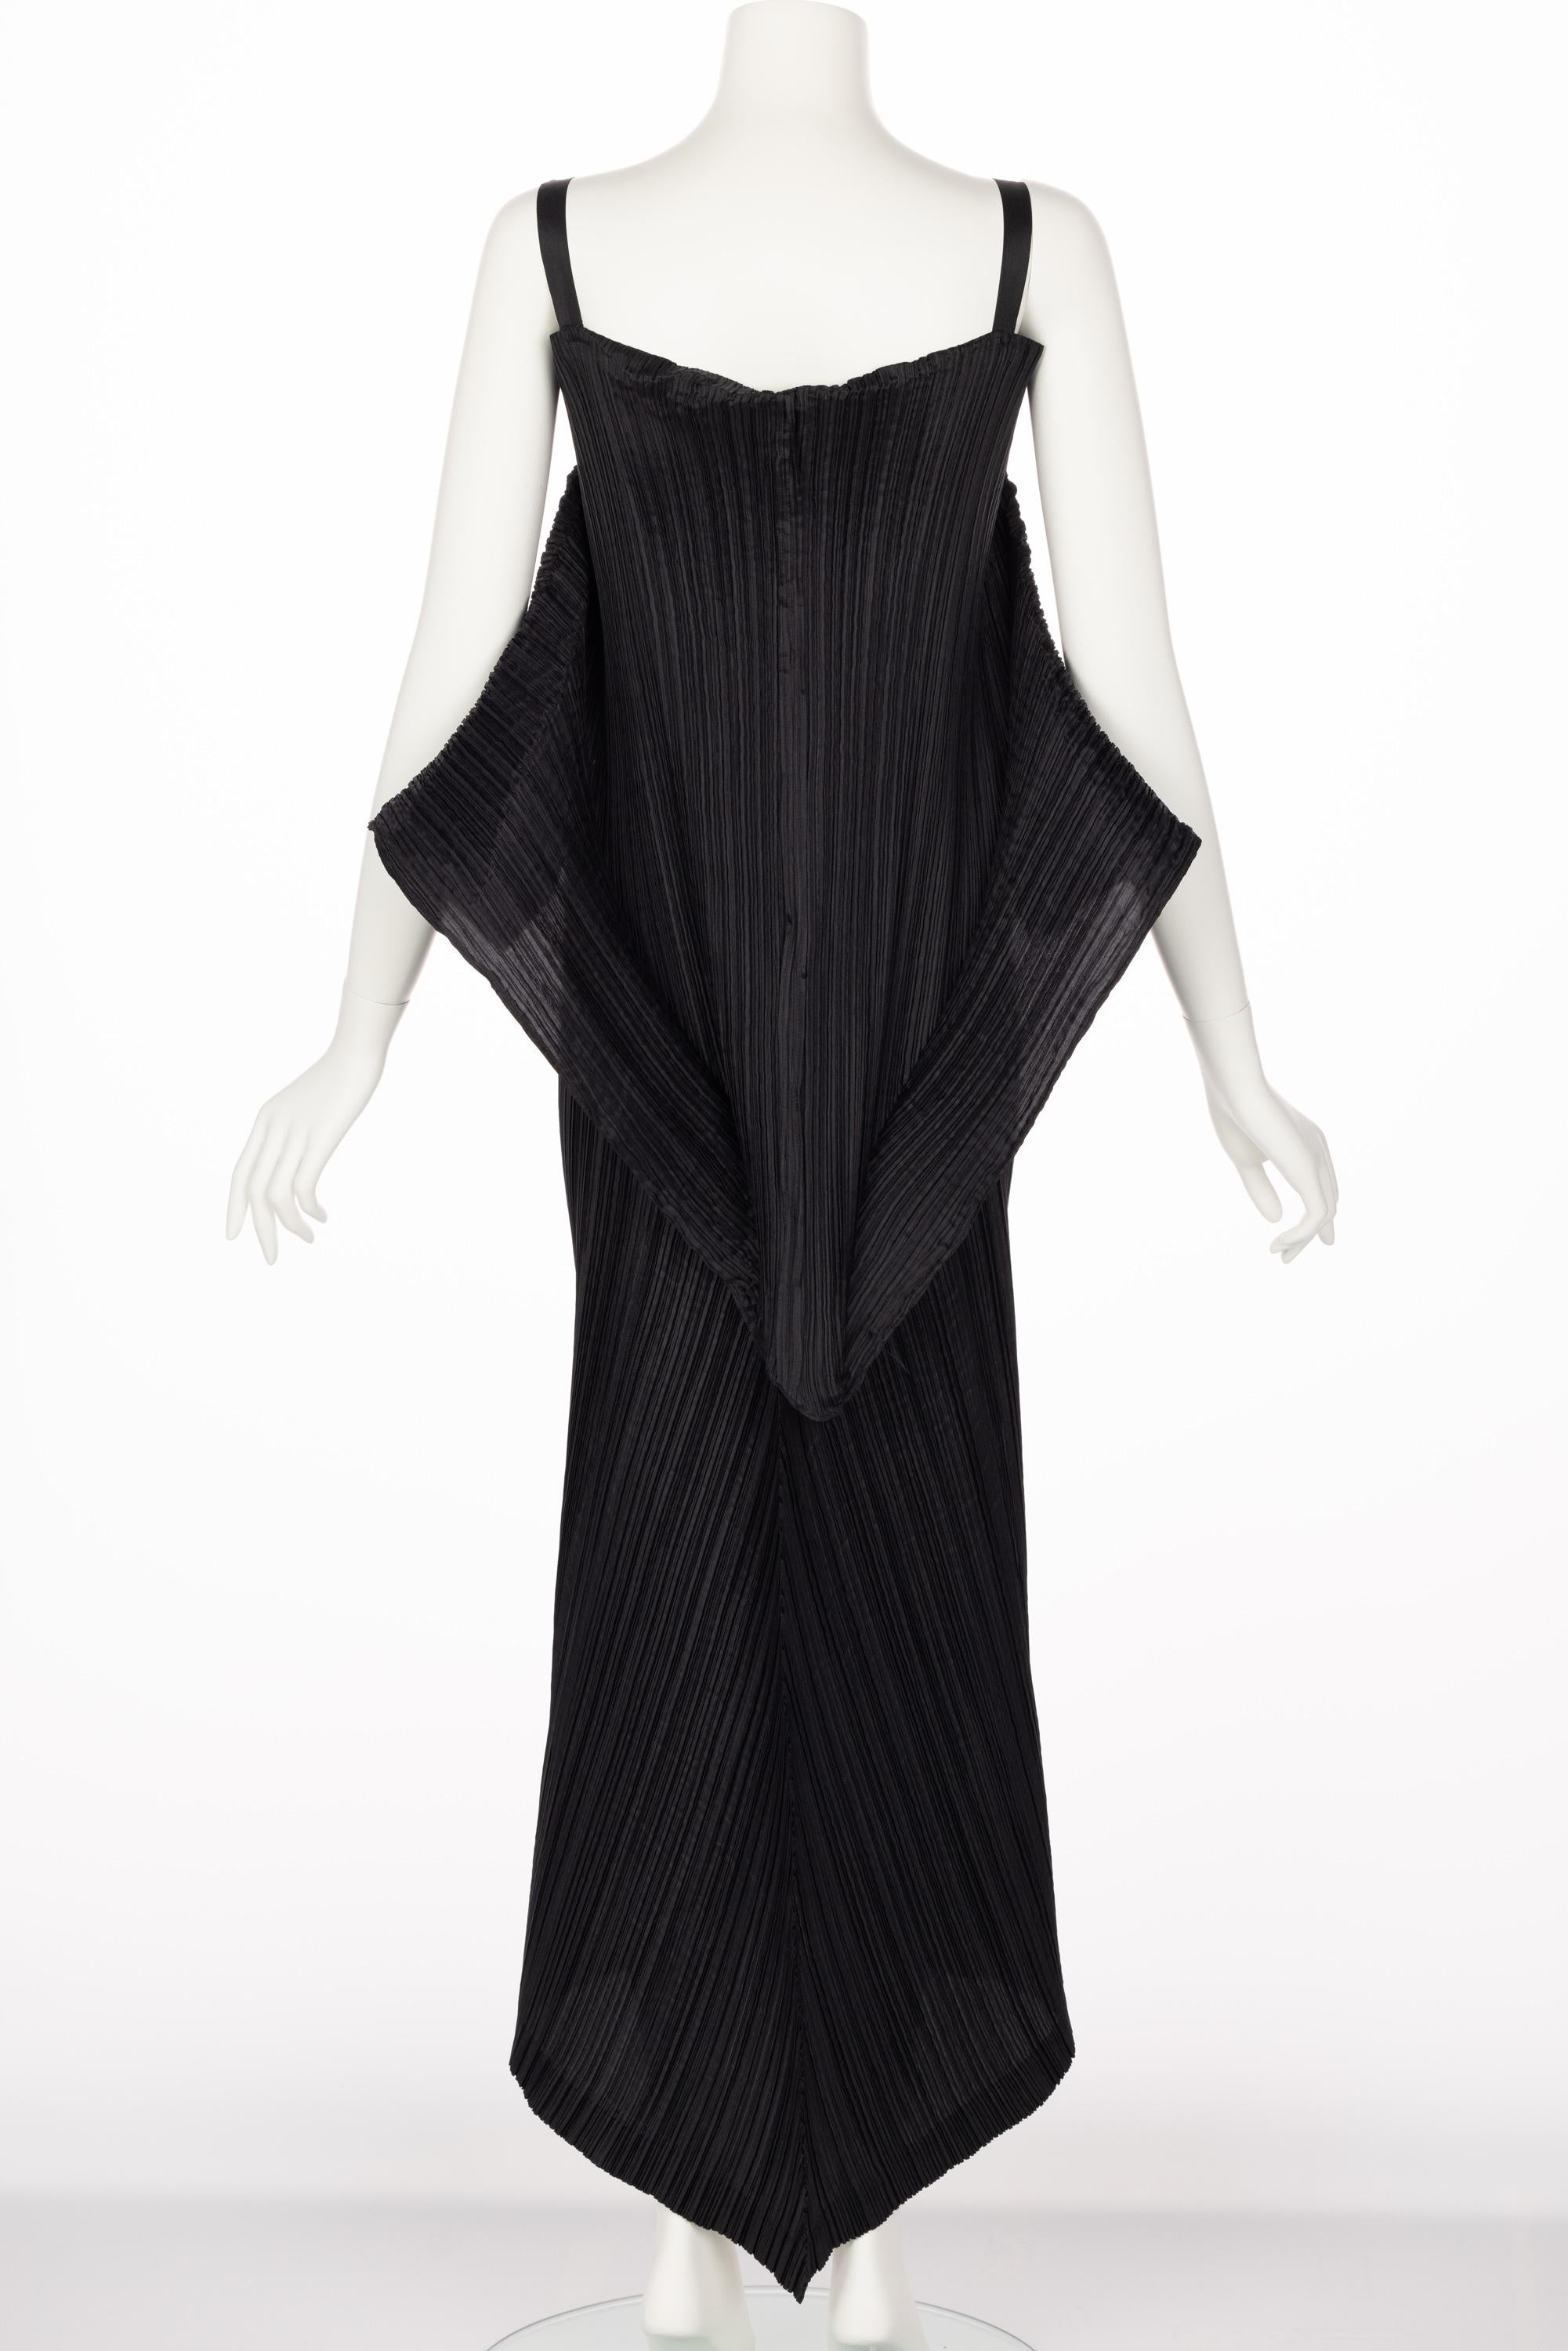 Issey Miyake Black Pleated Sculptural Sleeveless Maxi Dress, 1990s For Sale 2